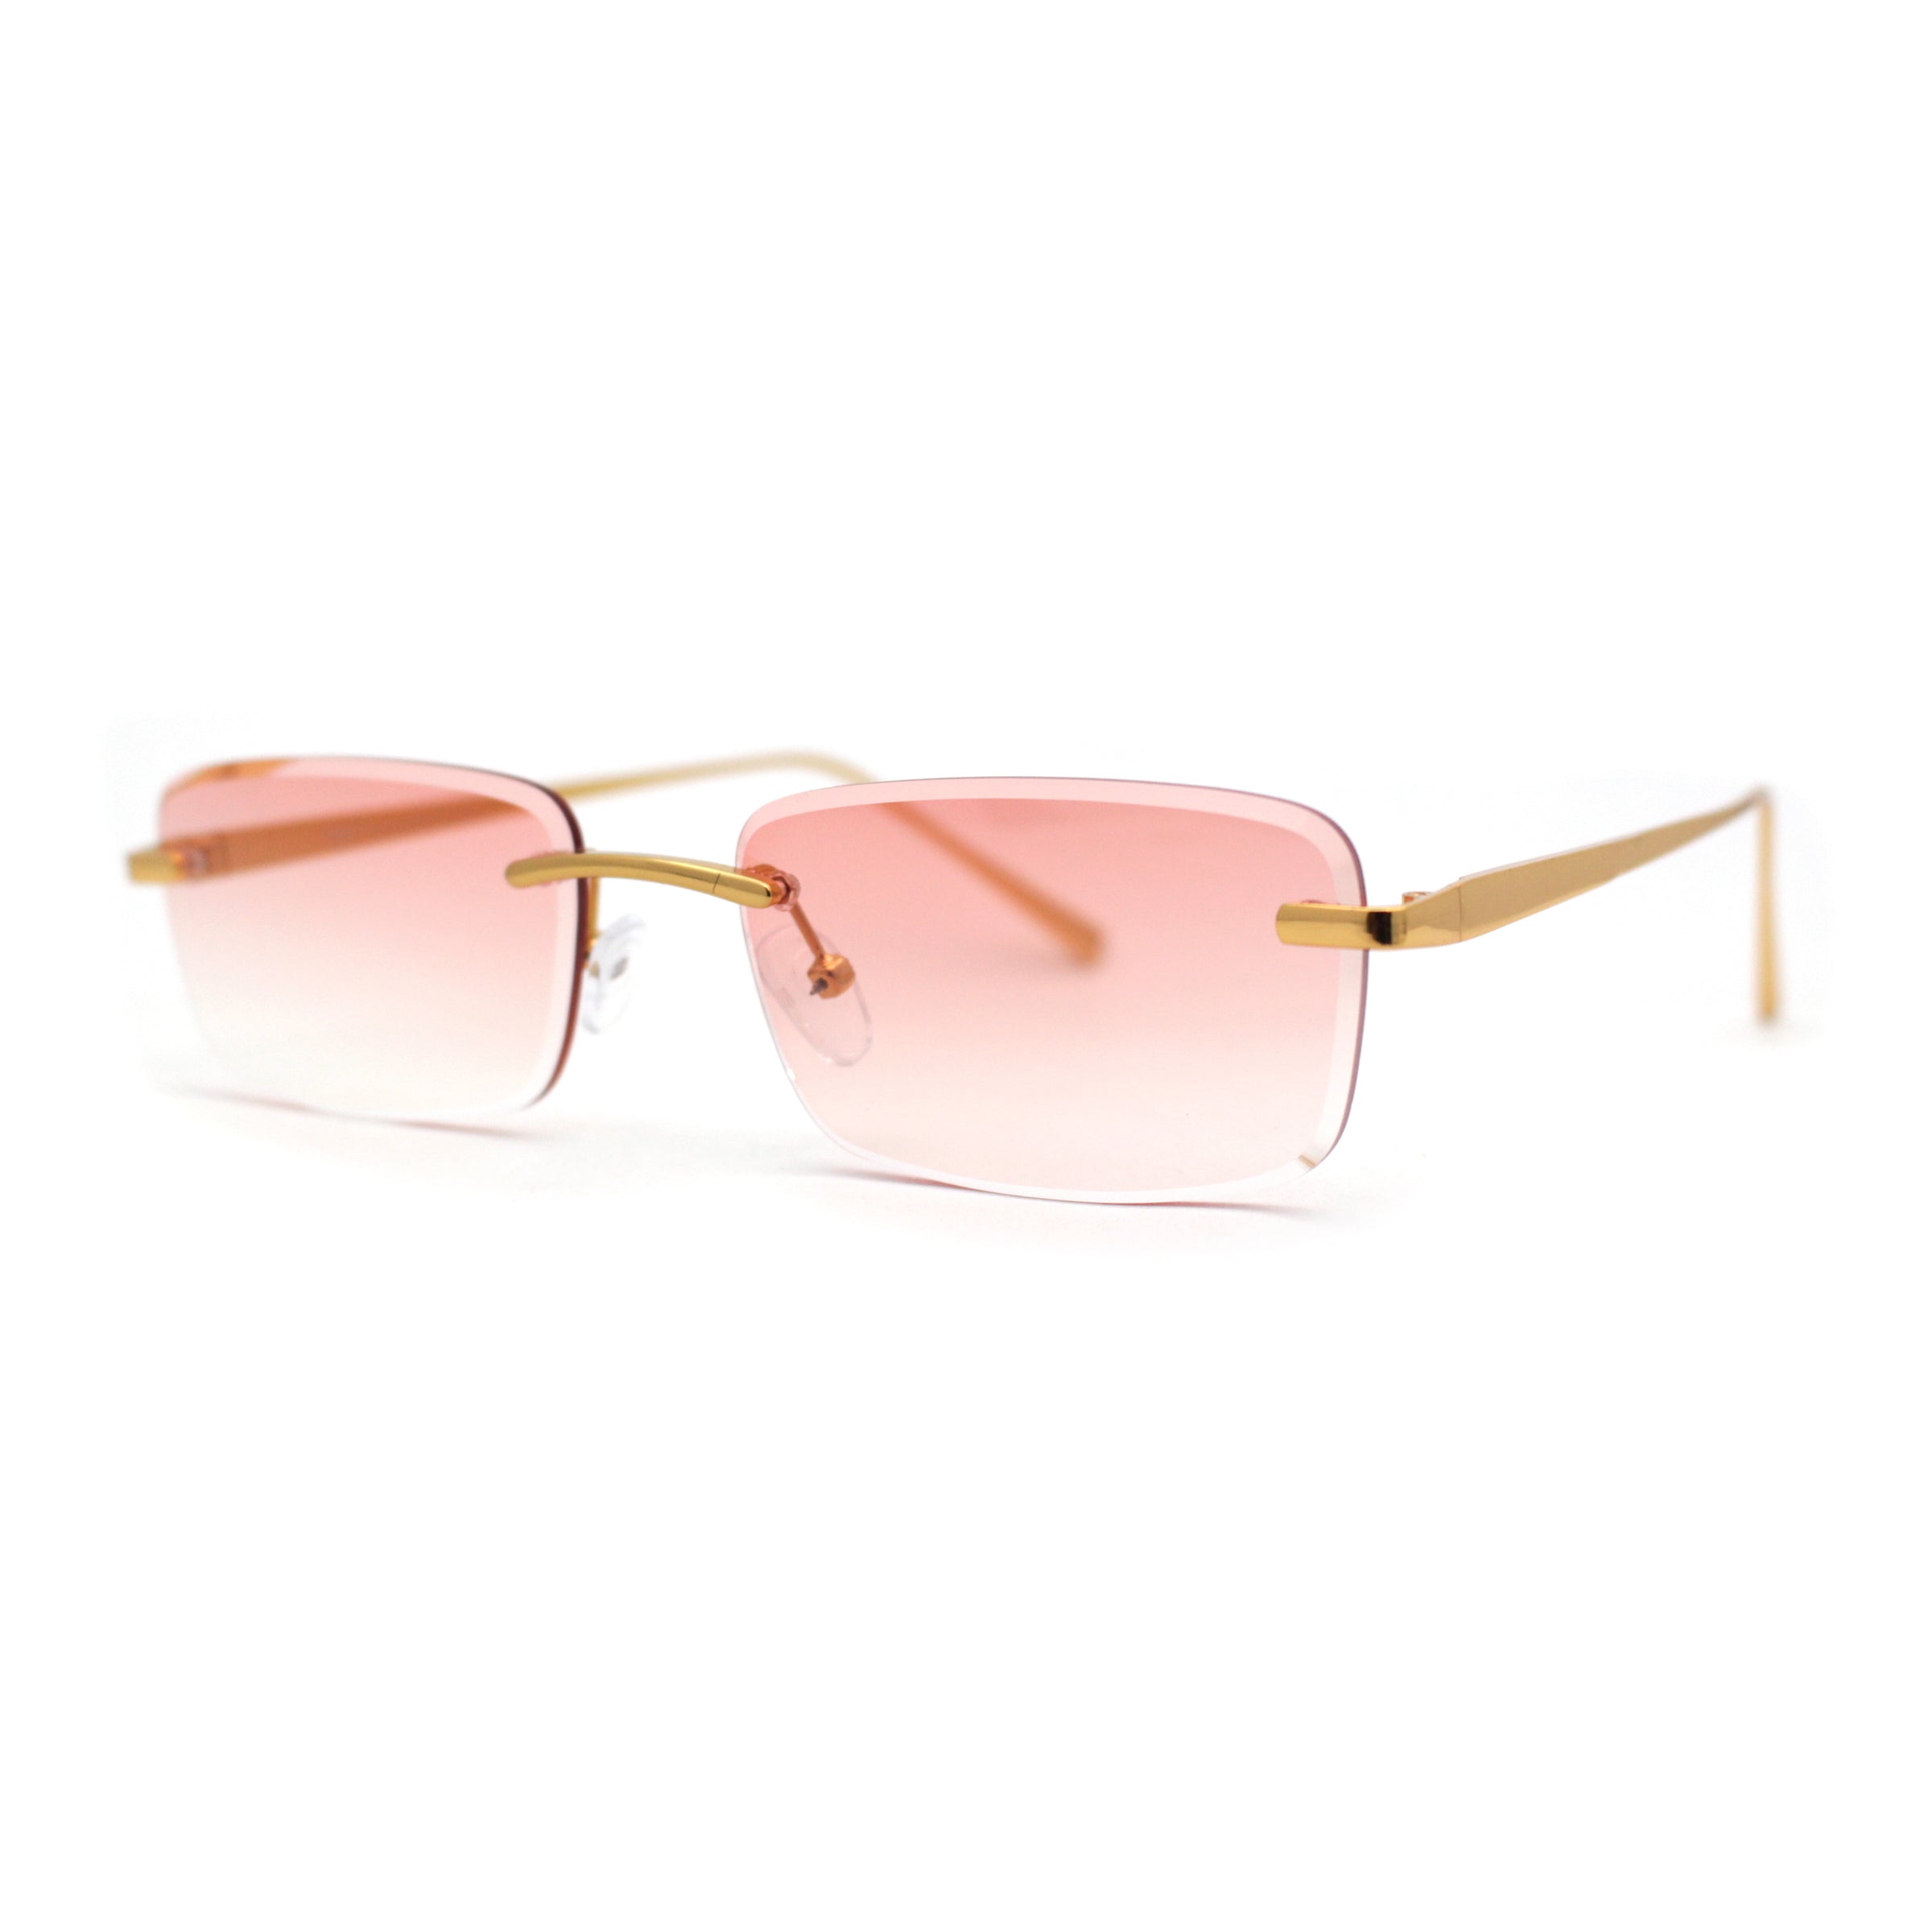 Miu Frameless Rimless Sunglasses Mens For Men And Women Trendy New Style  With Color Changing Progressive Film From Dunhuang1000, $37.67